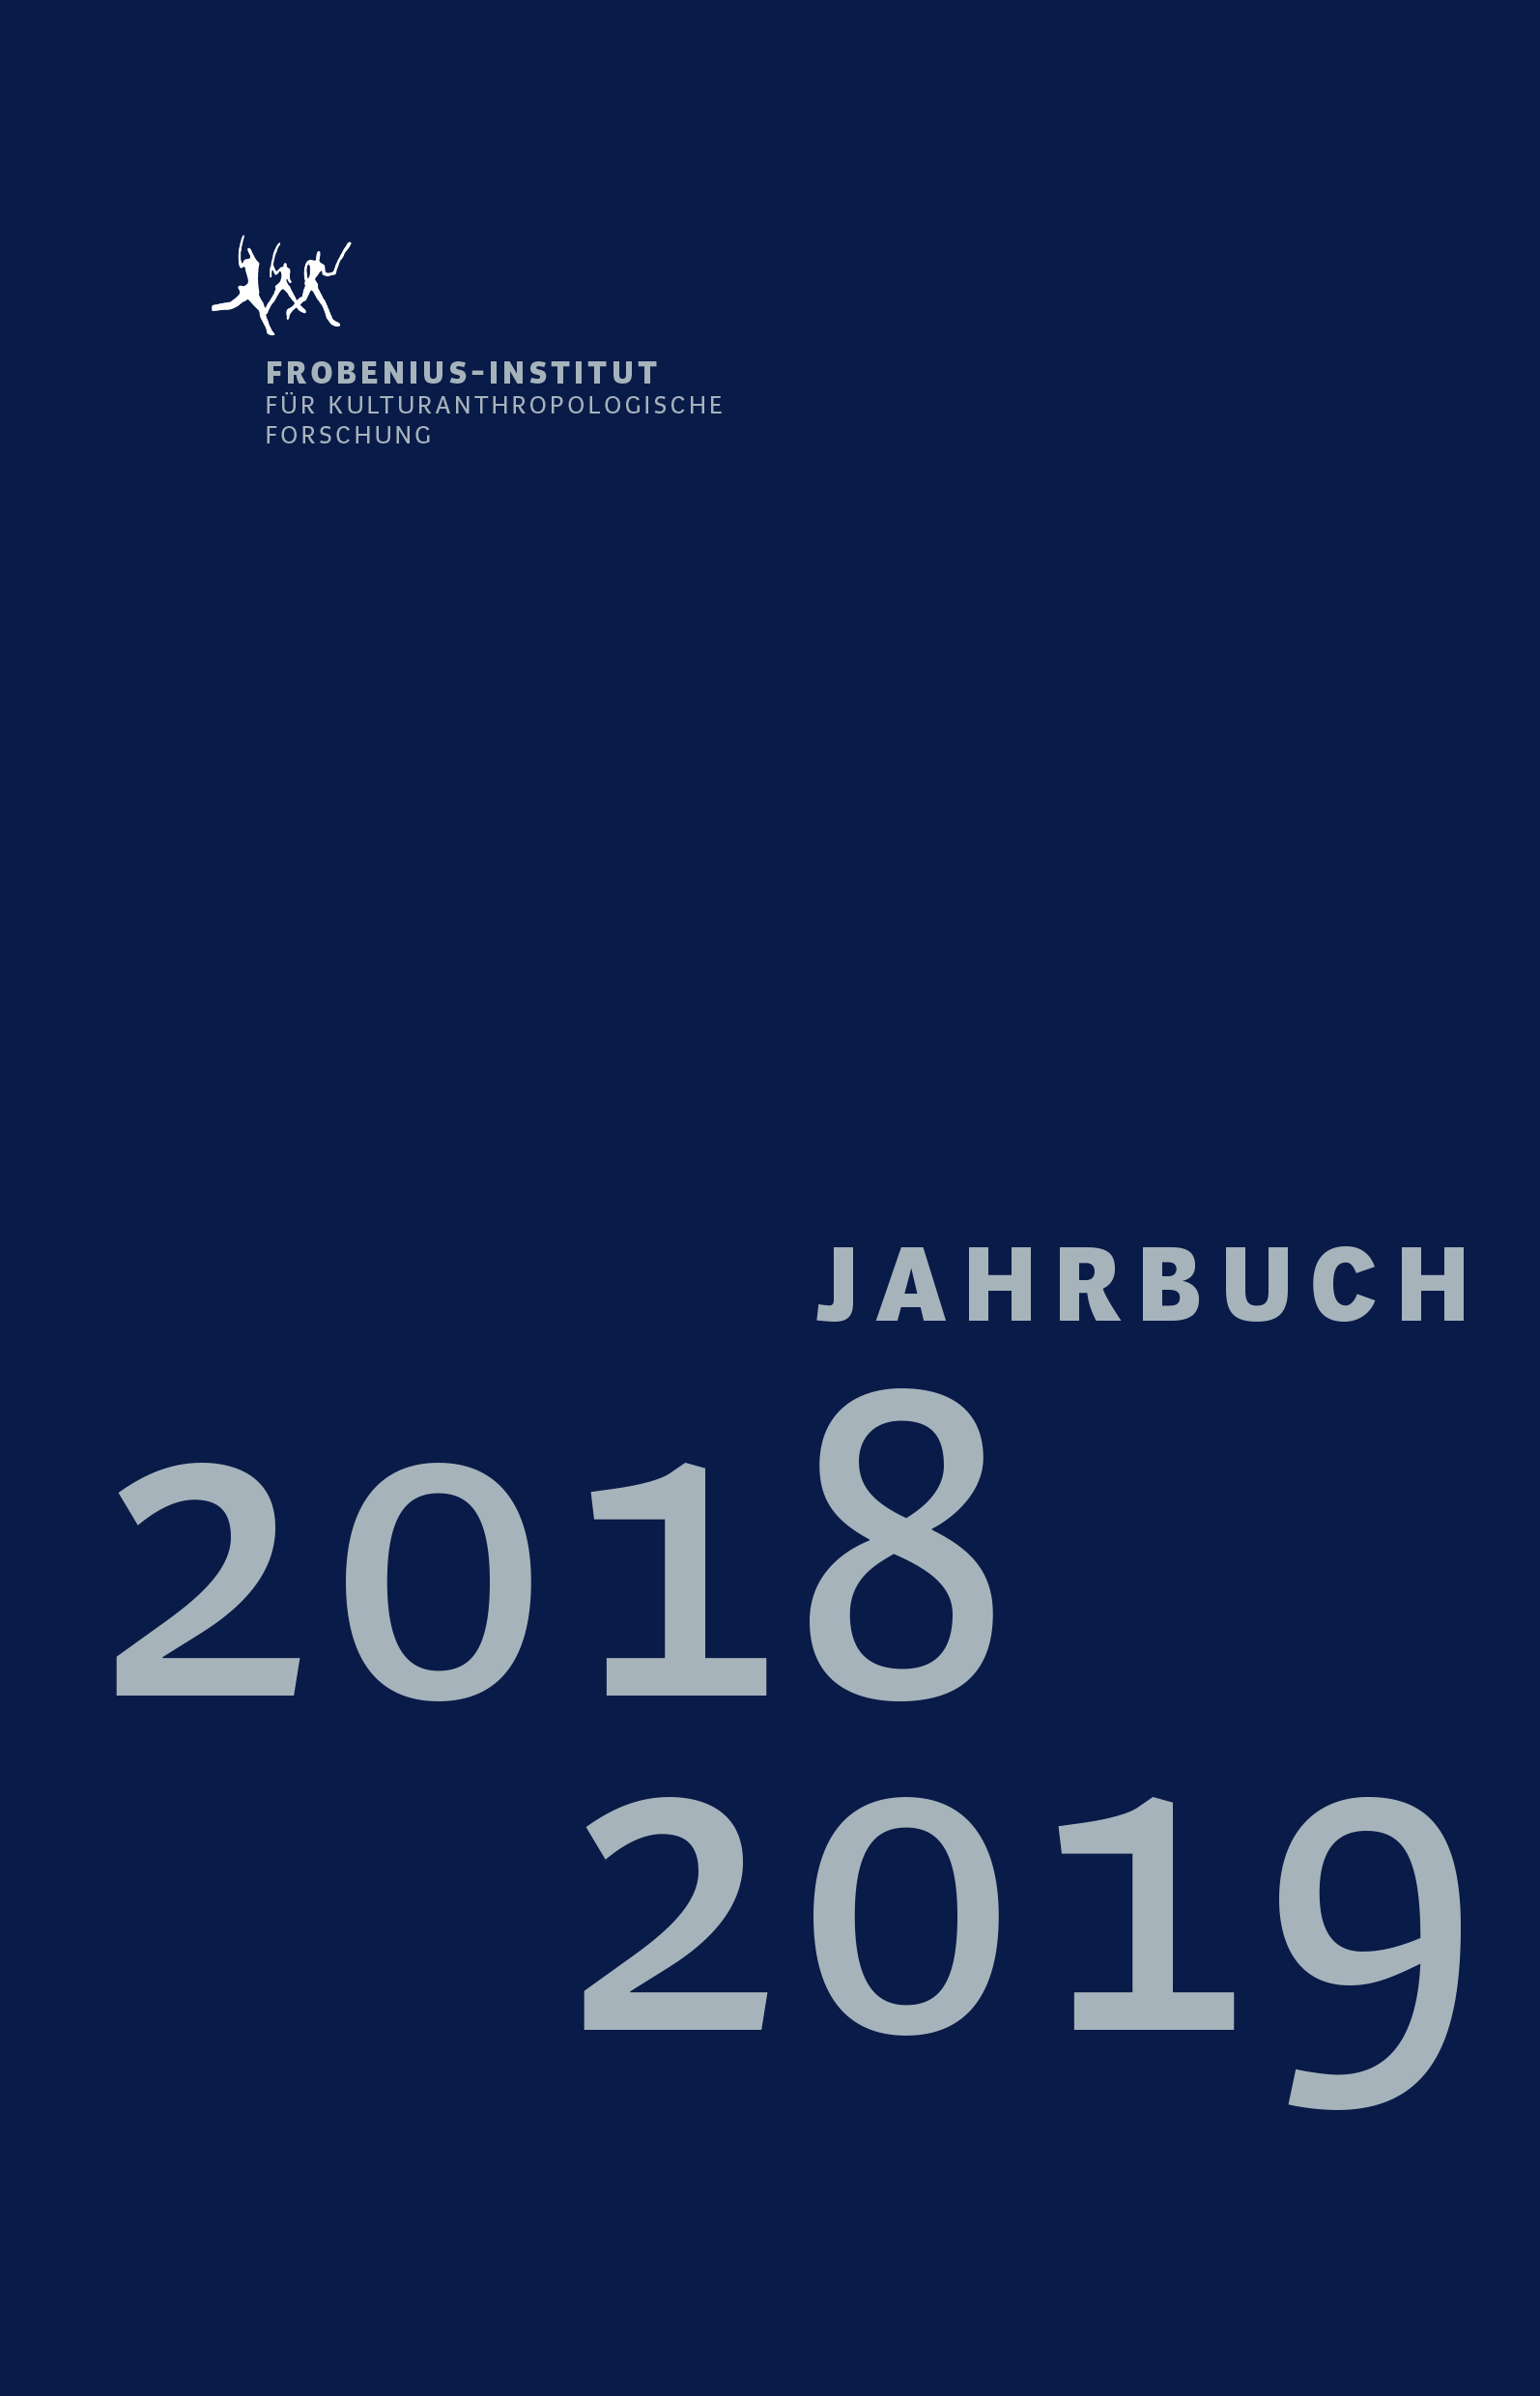 frob jahrbuch2019 cover